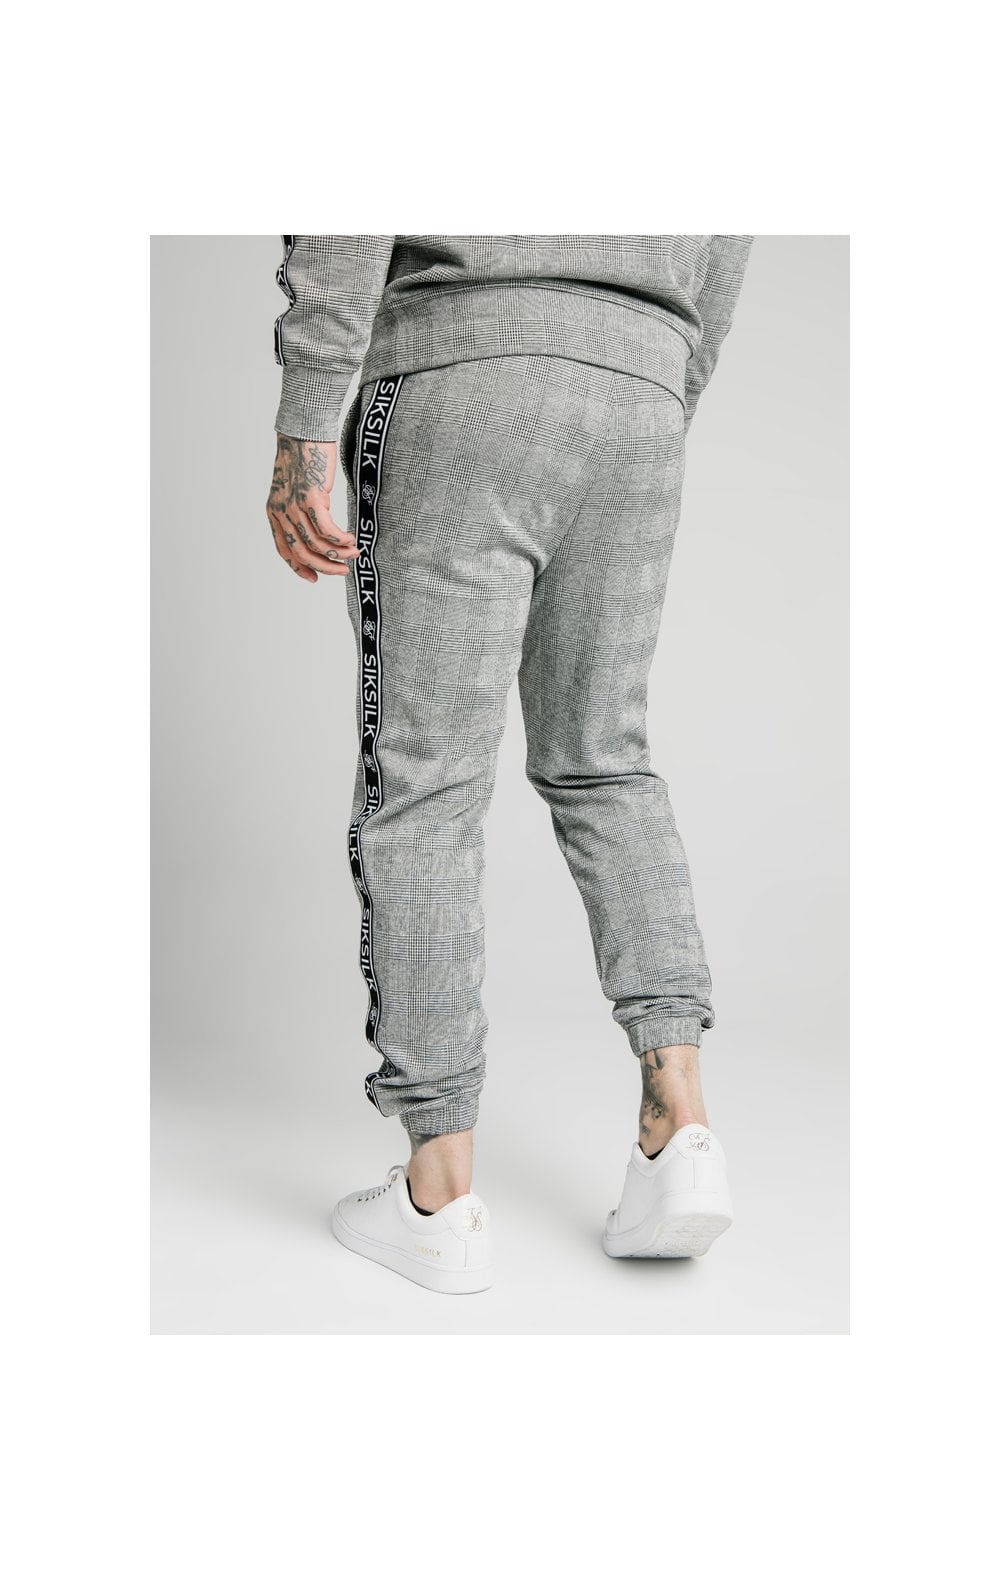 SikSilk Dog Tooth Check Cuffed Pant - Black & White (1)